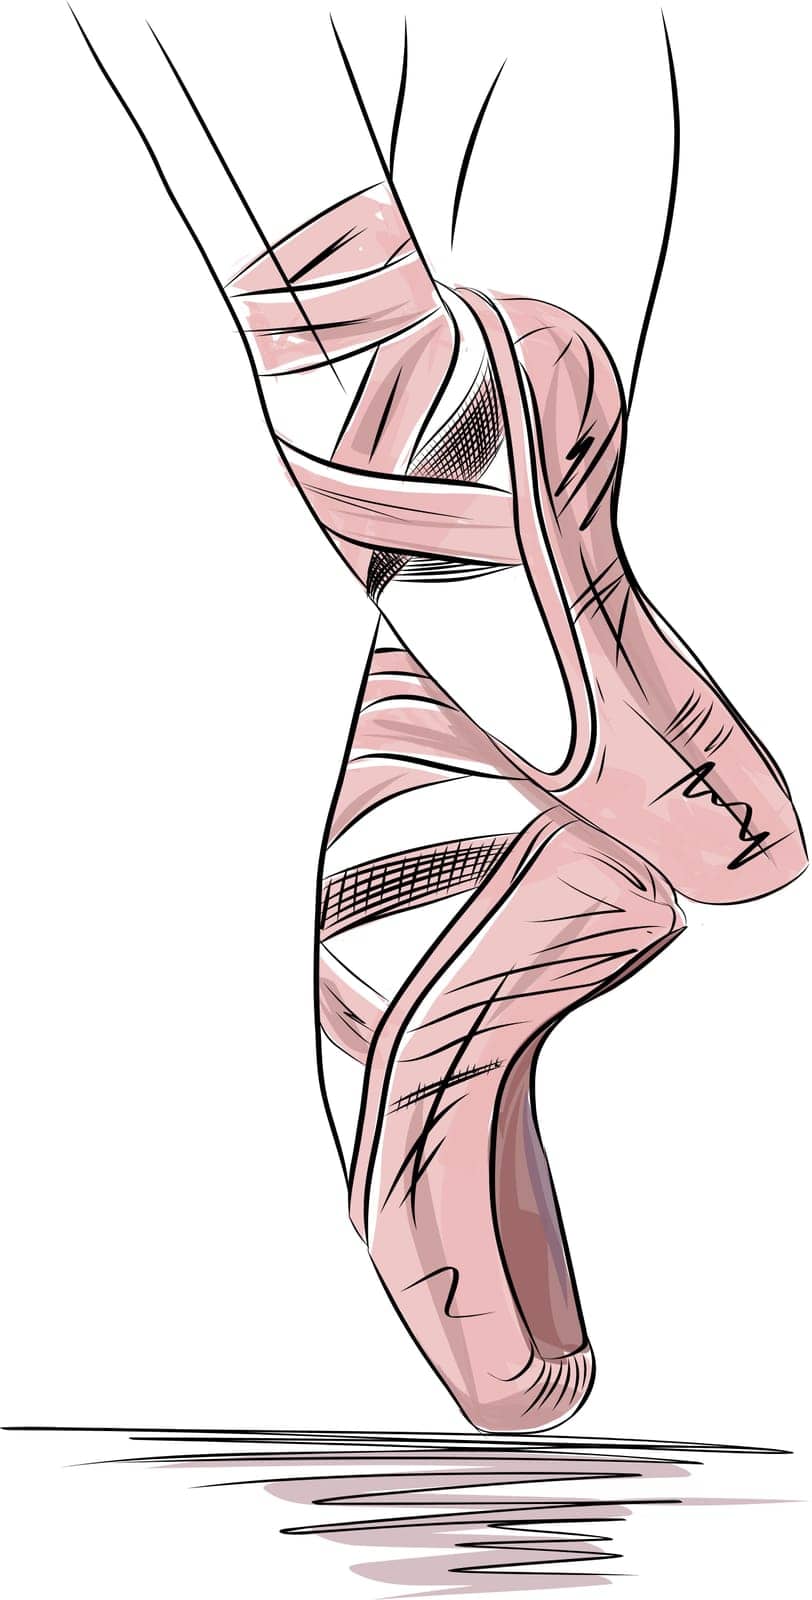 Hand drawn sketch of Ballerina pointe shoes, Feet in shoes of ballet class. Ballerina in pointe in a pose on one leg, graphic sketch illustration